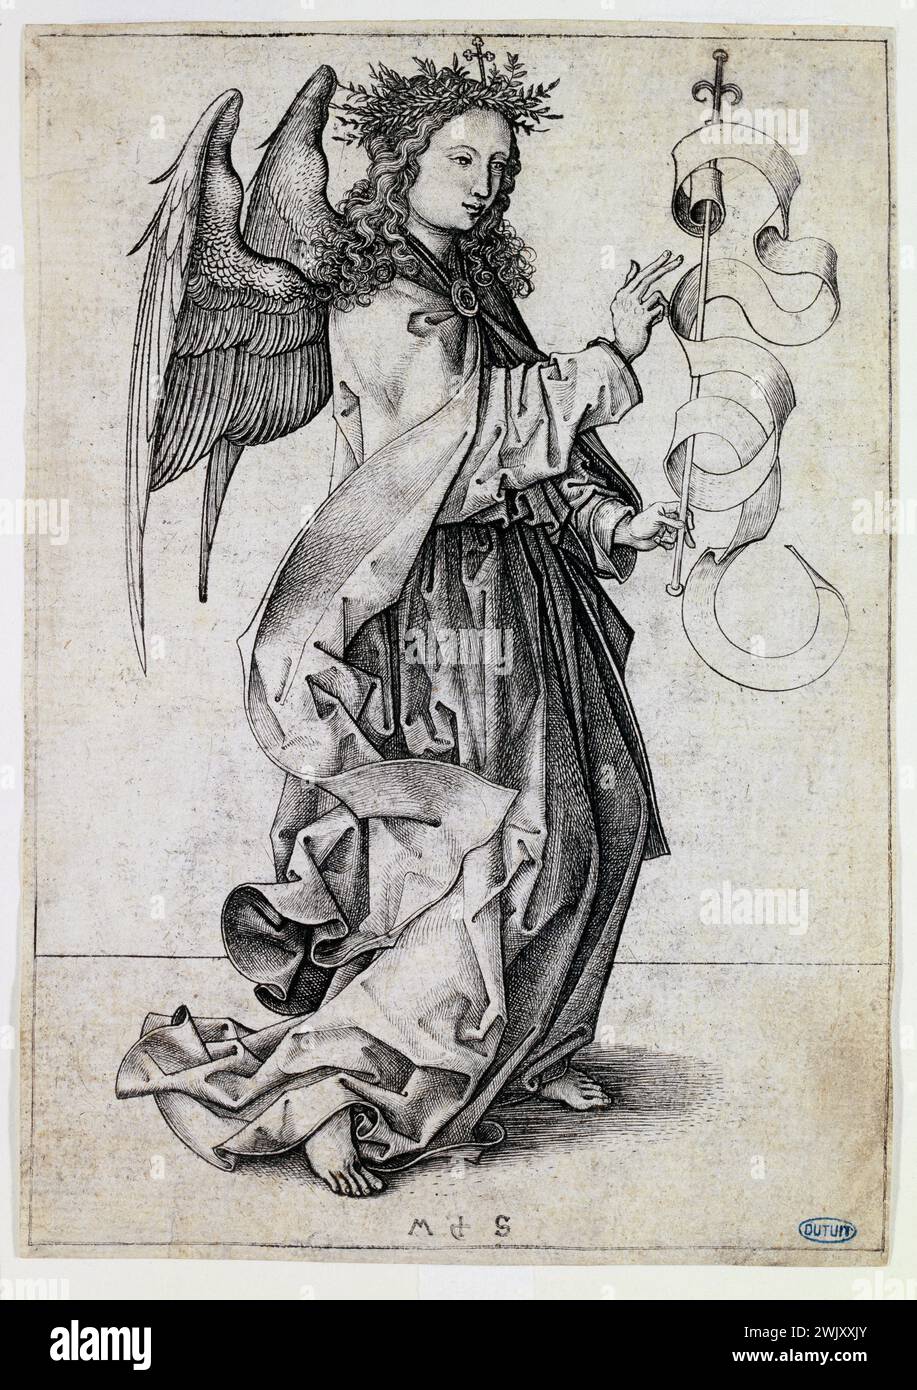 Martin Schonguer (1450-1491). 'The Angel of the Annunciation' (B1). Engraving. Museum of Fine Arts of the City of Paris, Petit Palais. 56495-4 Androgyne, angel, Annunciation, Bring, Archangel, Chretian art, Figurative art, Medieval art, religious art, beauty, blessing, Christianity, standing, foot, medieval epoque, wing figure, hand gesture, chretian iconography, religious iconography, Message, Messenger, Middle Ages, New Testament, wing character, biblical character, biblical scene, religious scene, alone, 15th XV 15th 15th 15th century, engraving Stock Photo